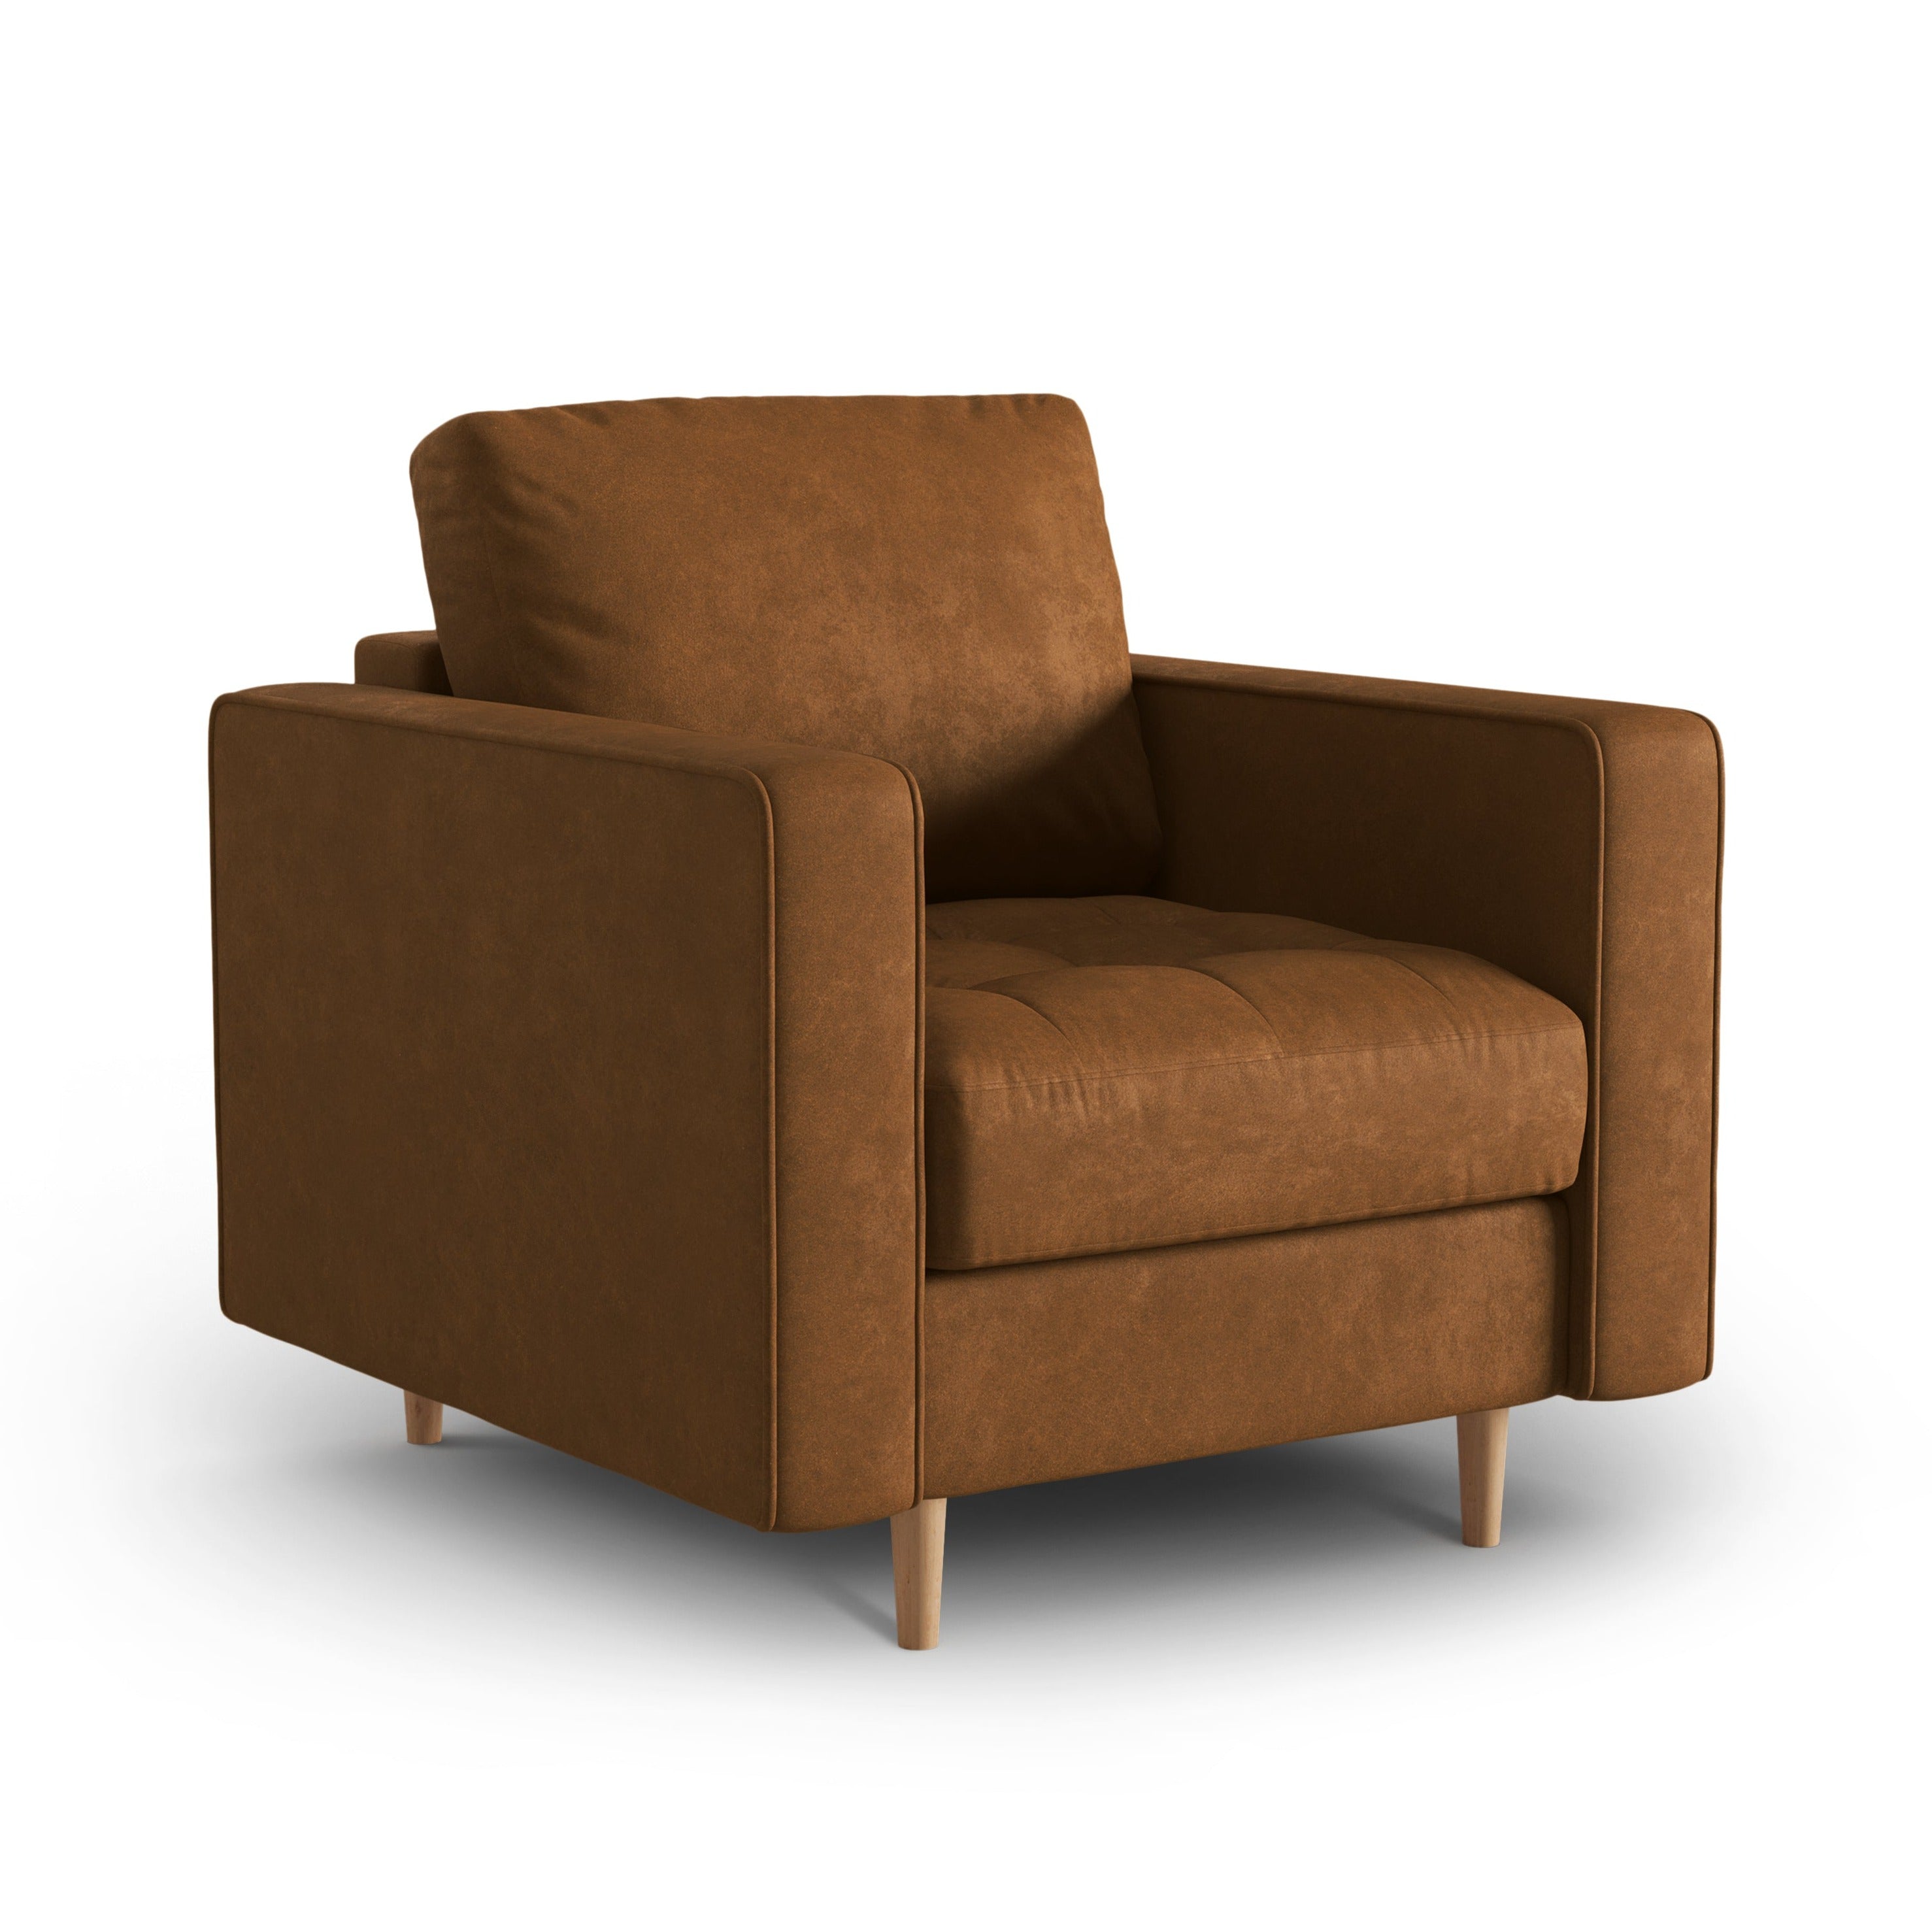 Armchair from Eco -leather Gobi